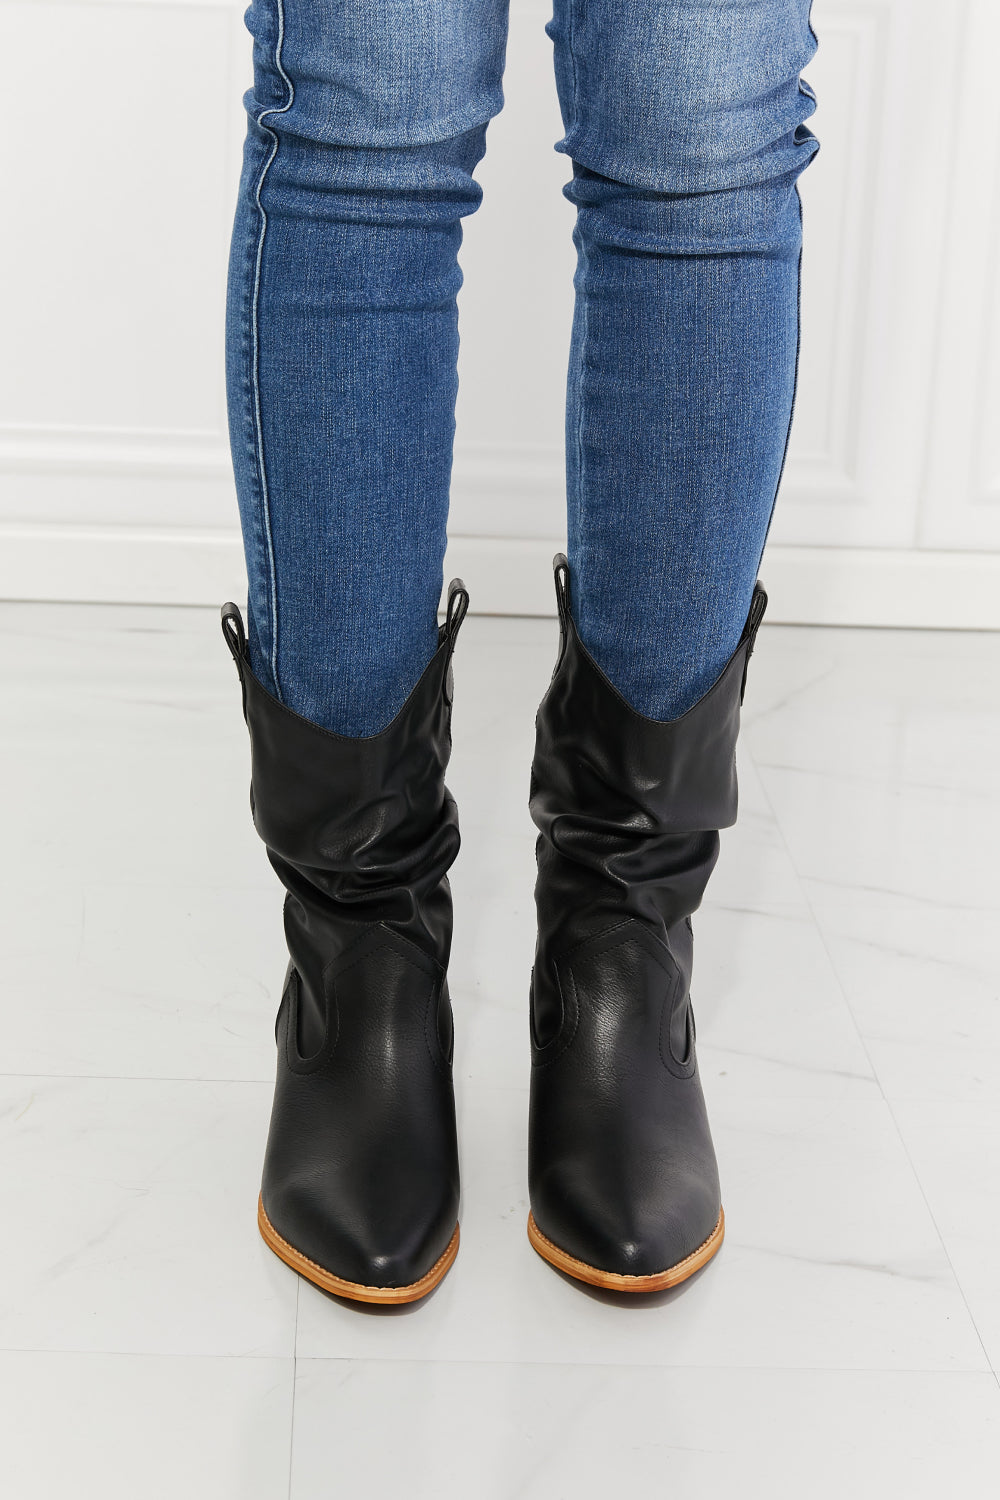 MMShoes Better in Texas Scrunch Cowboy Boots in Black - BEAUTY COSMOTICS SHOP